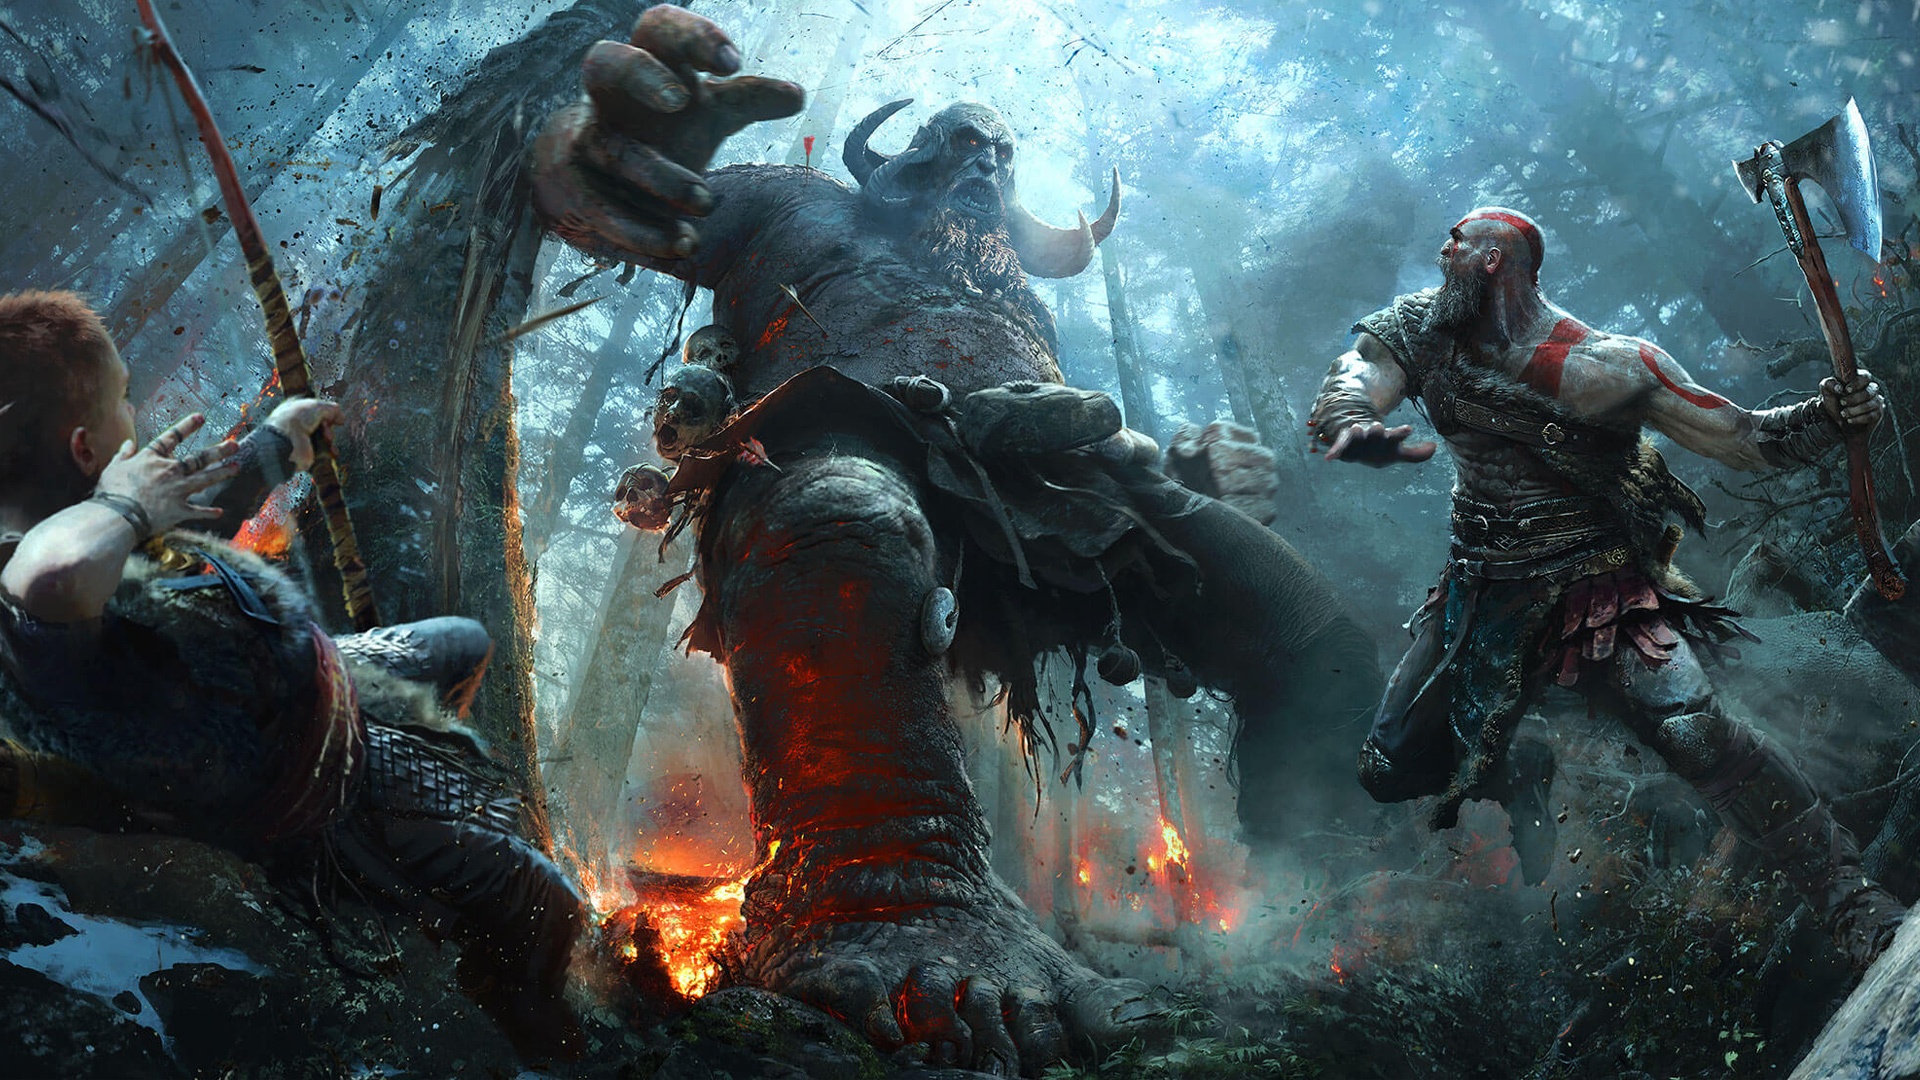  God of War's Cory Barlog says PlayStation studios convinced Sony to put games on PC 